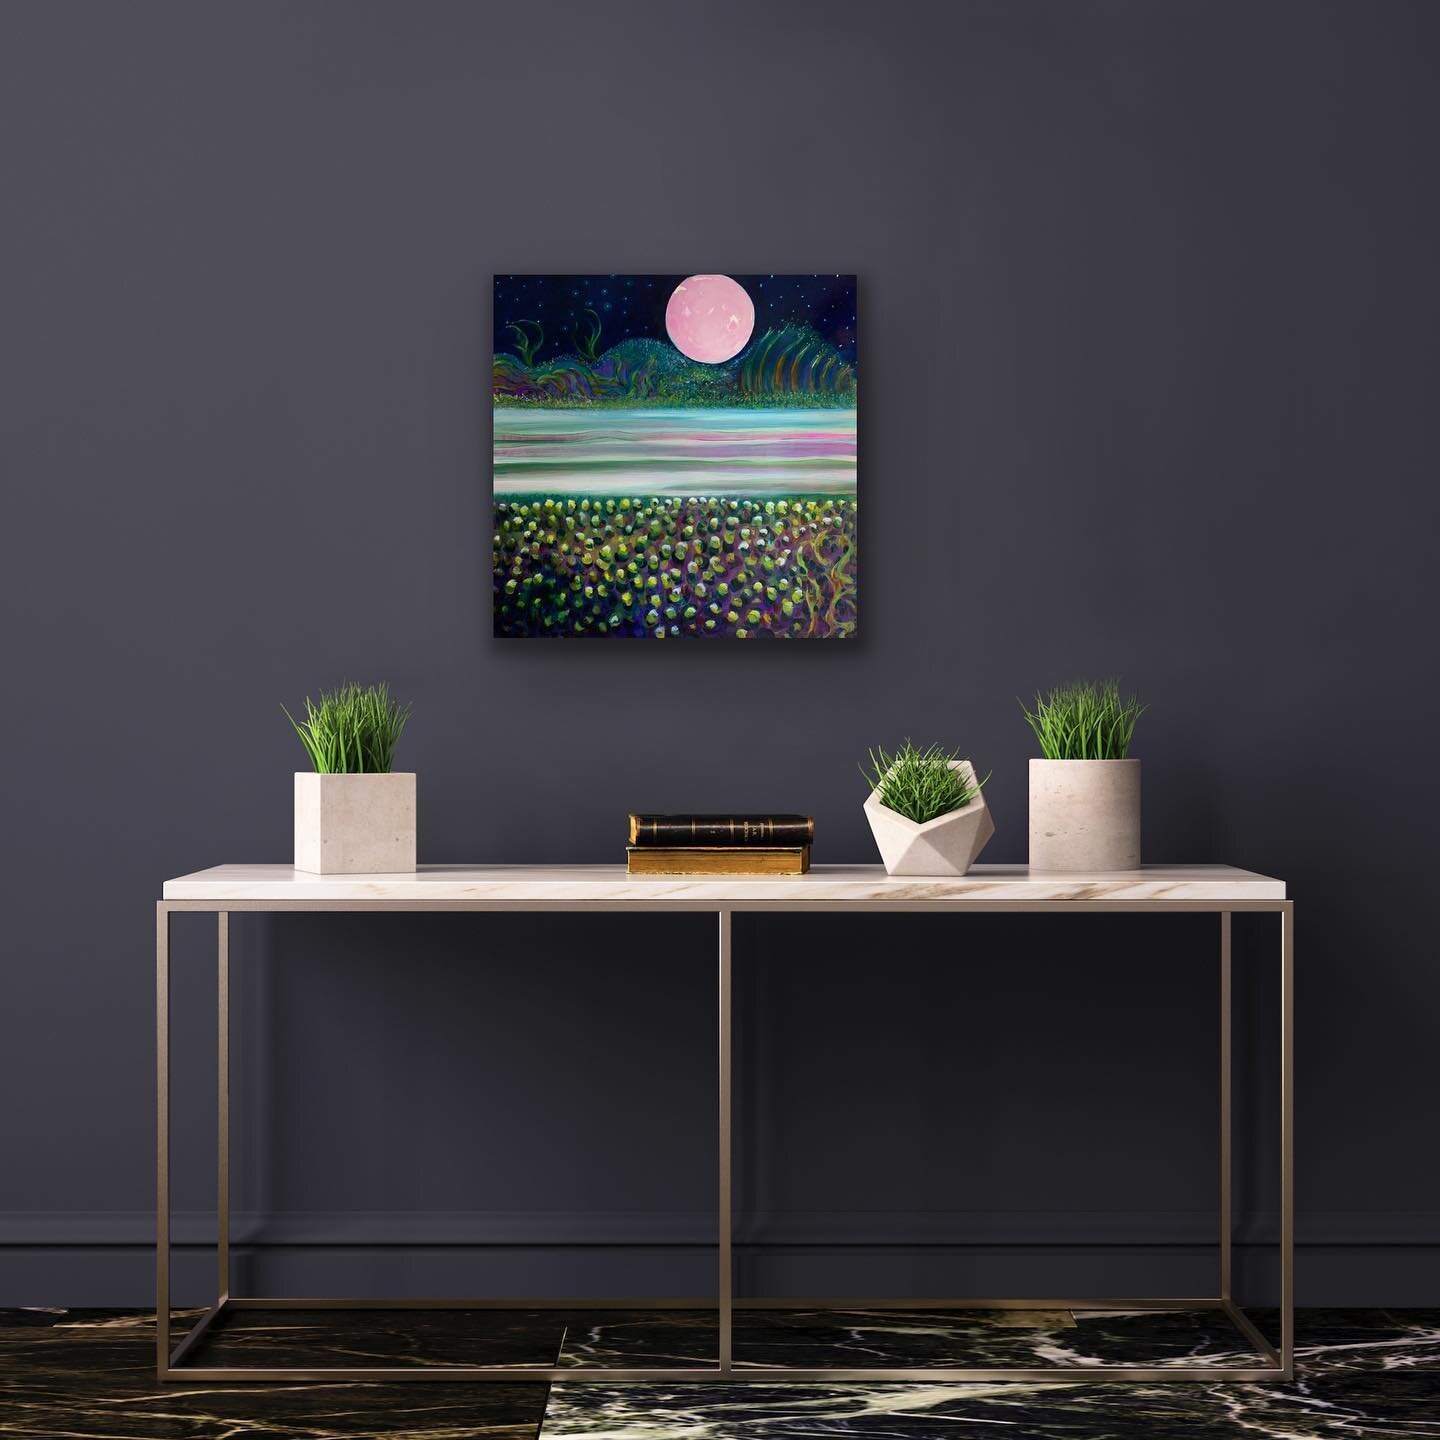 Really pleased that &ldquo;Magenta Midnight Moon&rdquo; is heading to South Korea 🇰🇷 🇰🇷🇰🇷🇰🇷🇰🇷🇰🇷🇰🇷🇰🇷🇰🇷🇰🇷to be part of a fabulous collection.
Oh the wonders of Instagram.
Very grateful for the positive response to this new series &l